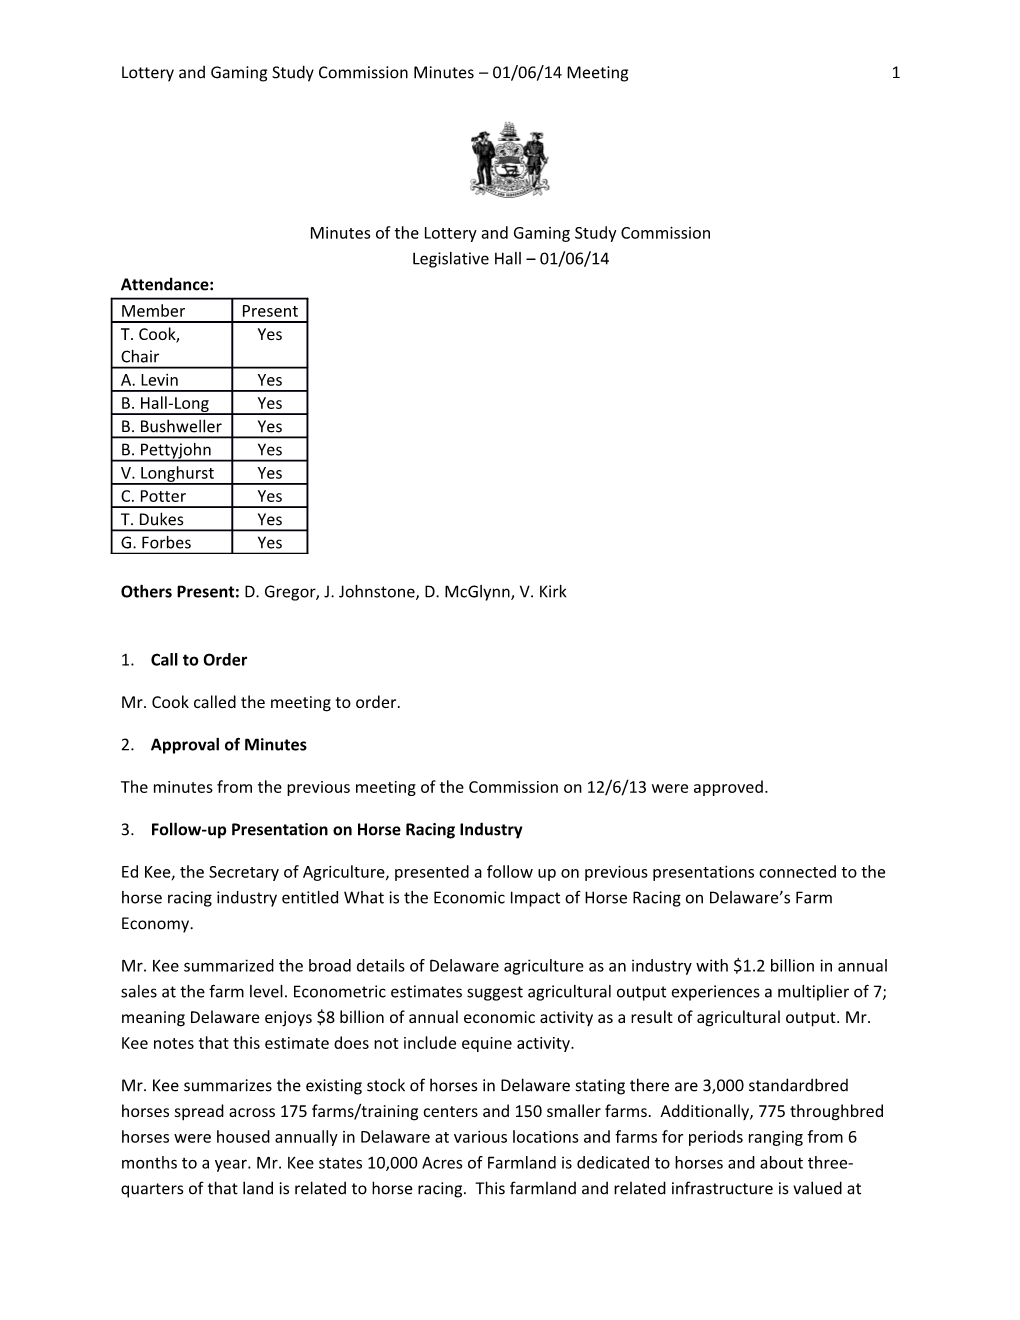 Lottery and Gaming Study Commission Minutes 01/06/14 Meeting 1